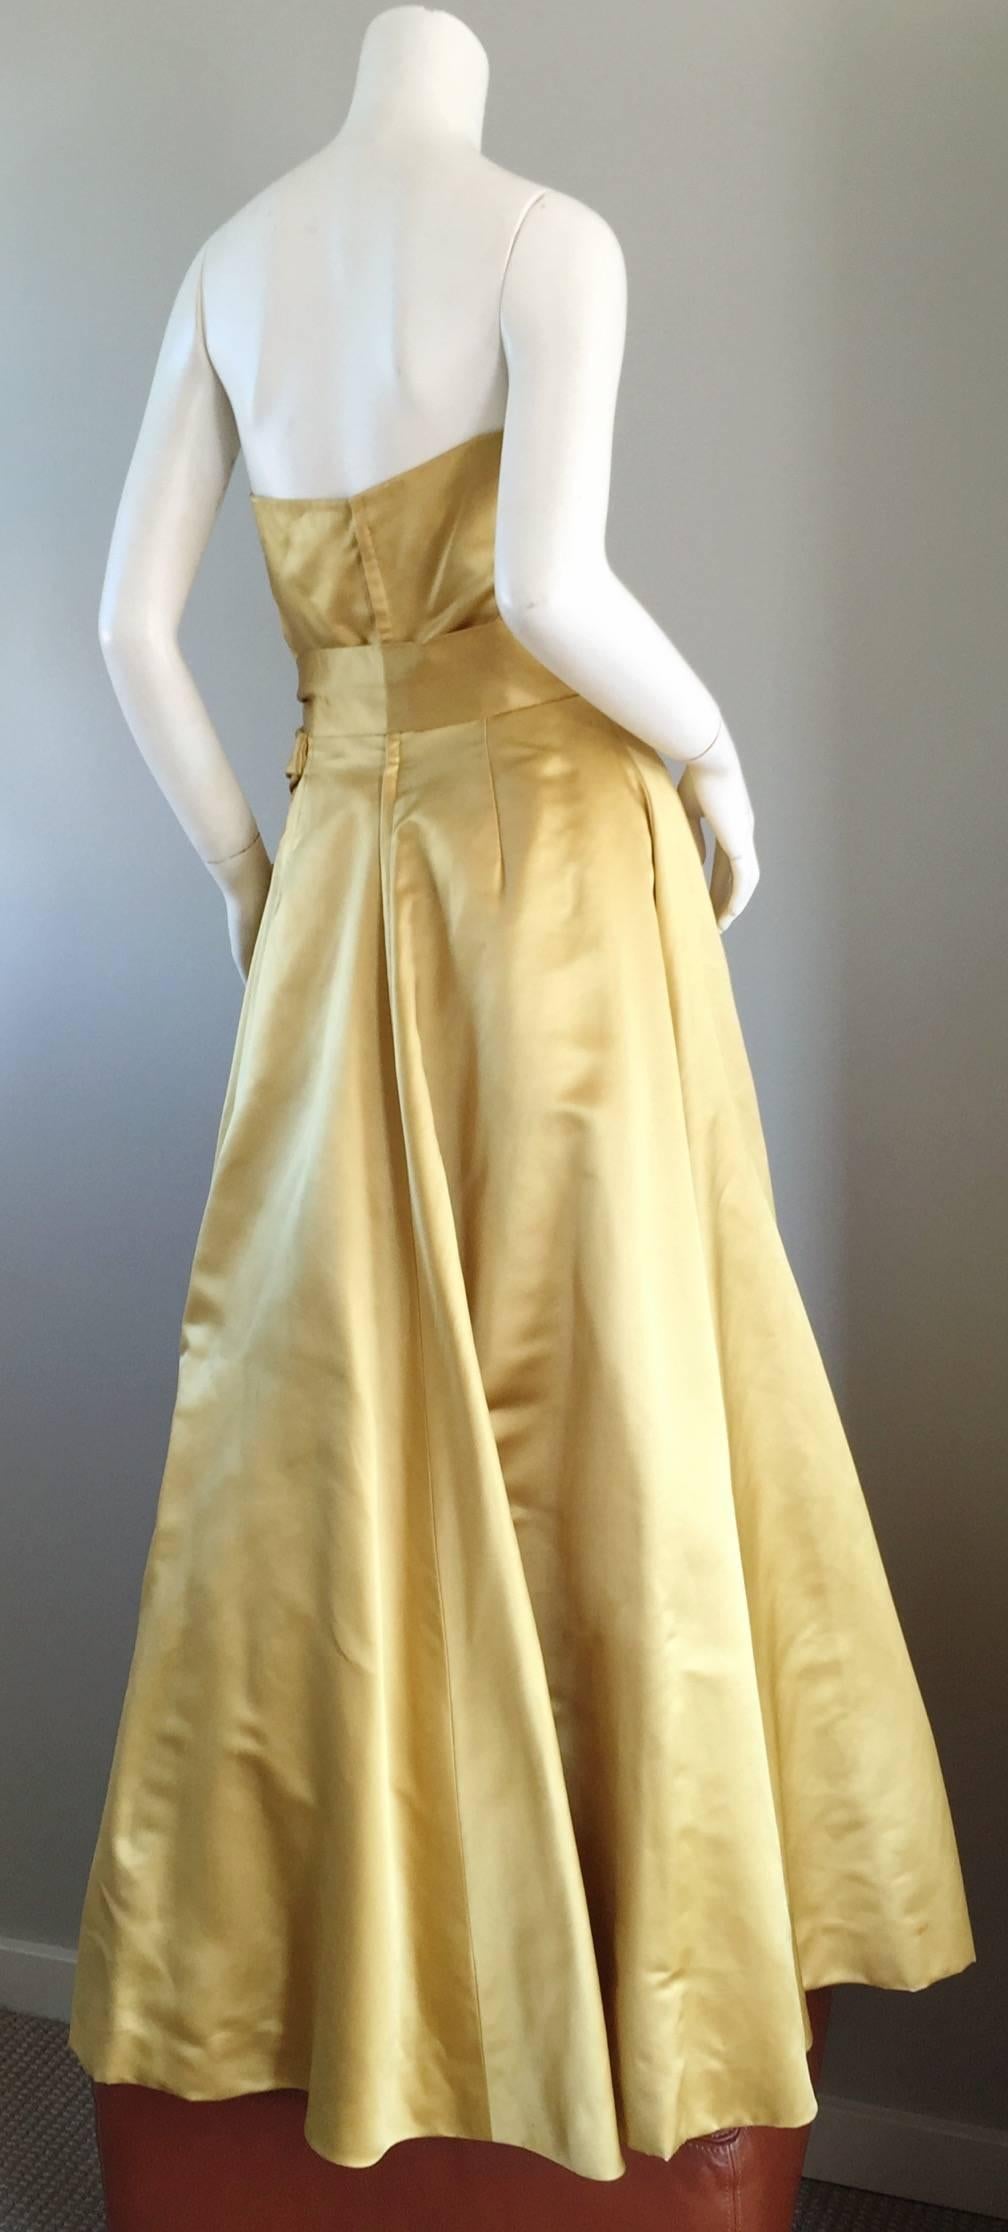 Women's Exceptional 1950s Harvey Berin for I. Magnin Gold Vintage 50s Satin Gown / Dress